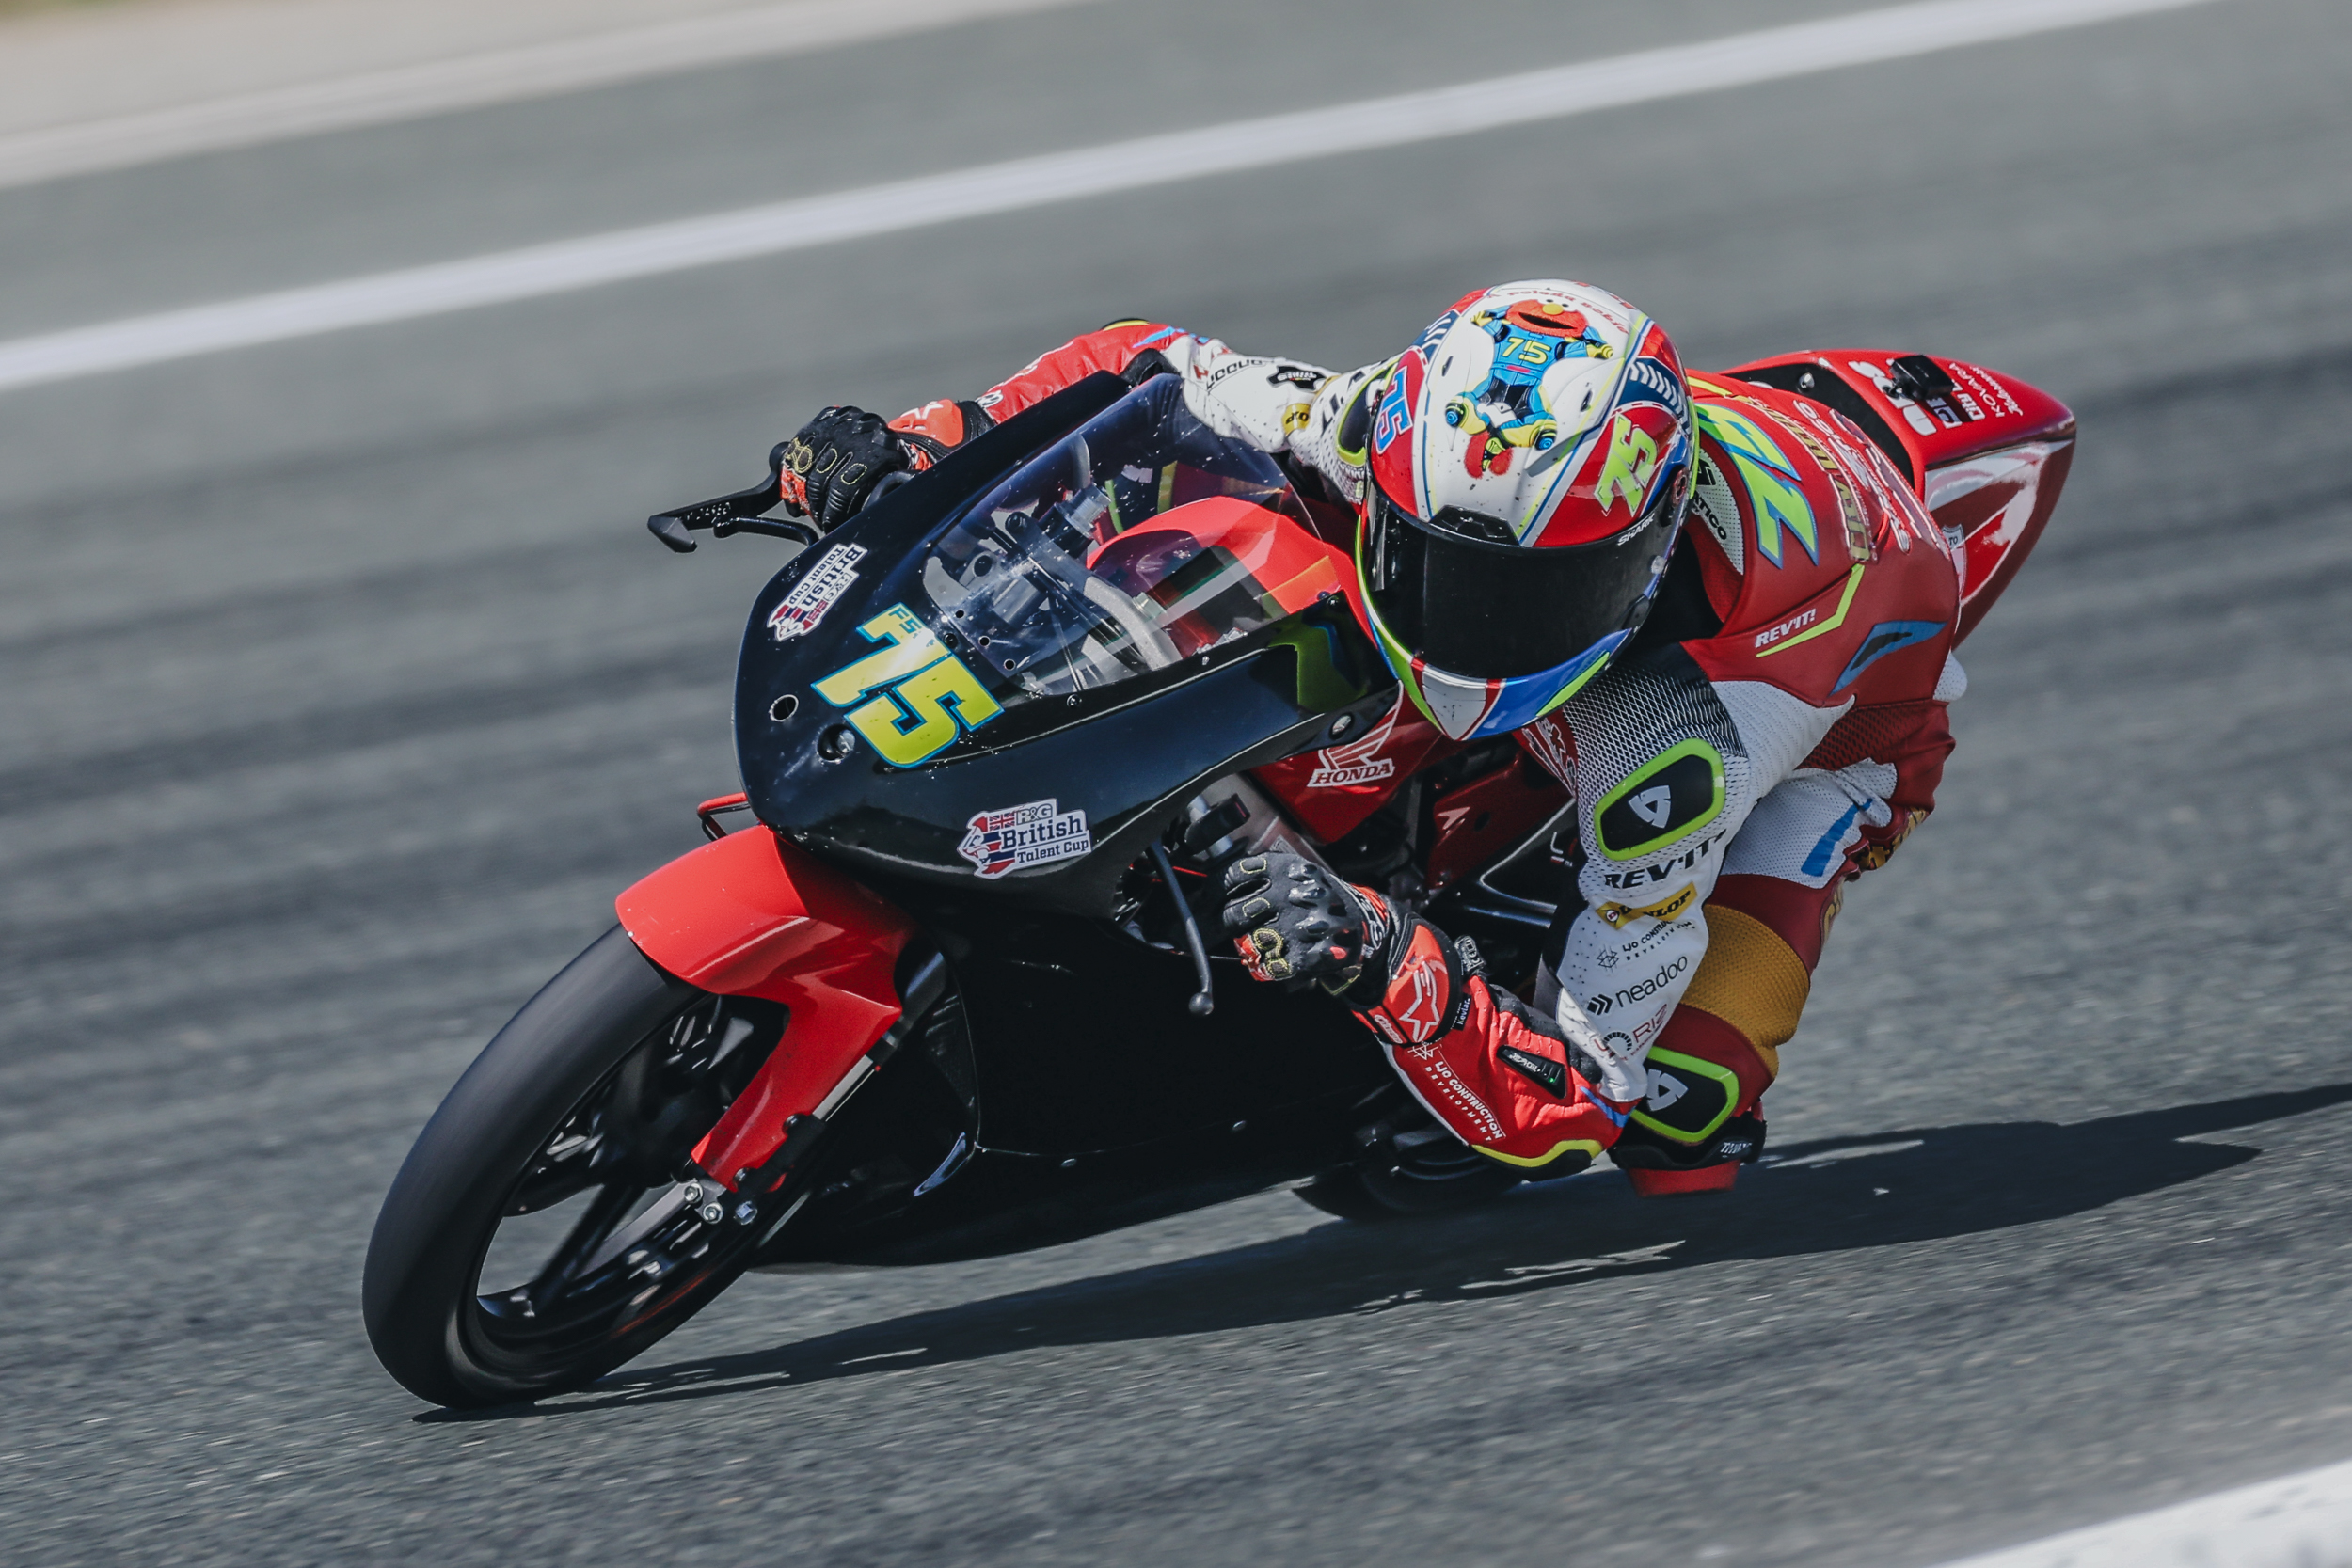 Rising Stars And Seasoned Pros: British Talent Cup, Quattro Group British Supersport, And Bmw F 900 R Cup Wrap Up Successful Pre-season Test At Circuito De Navarra